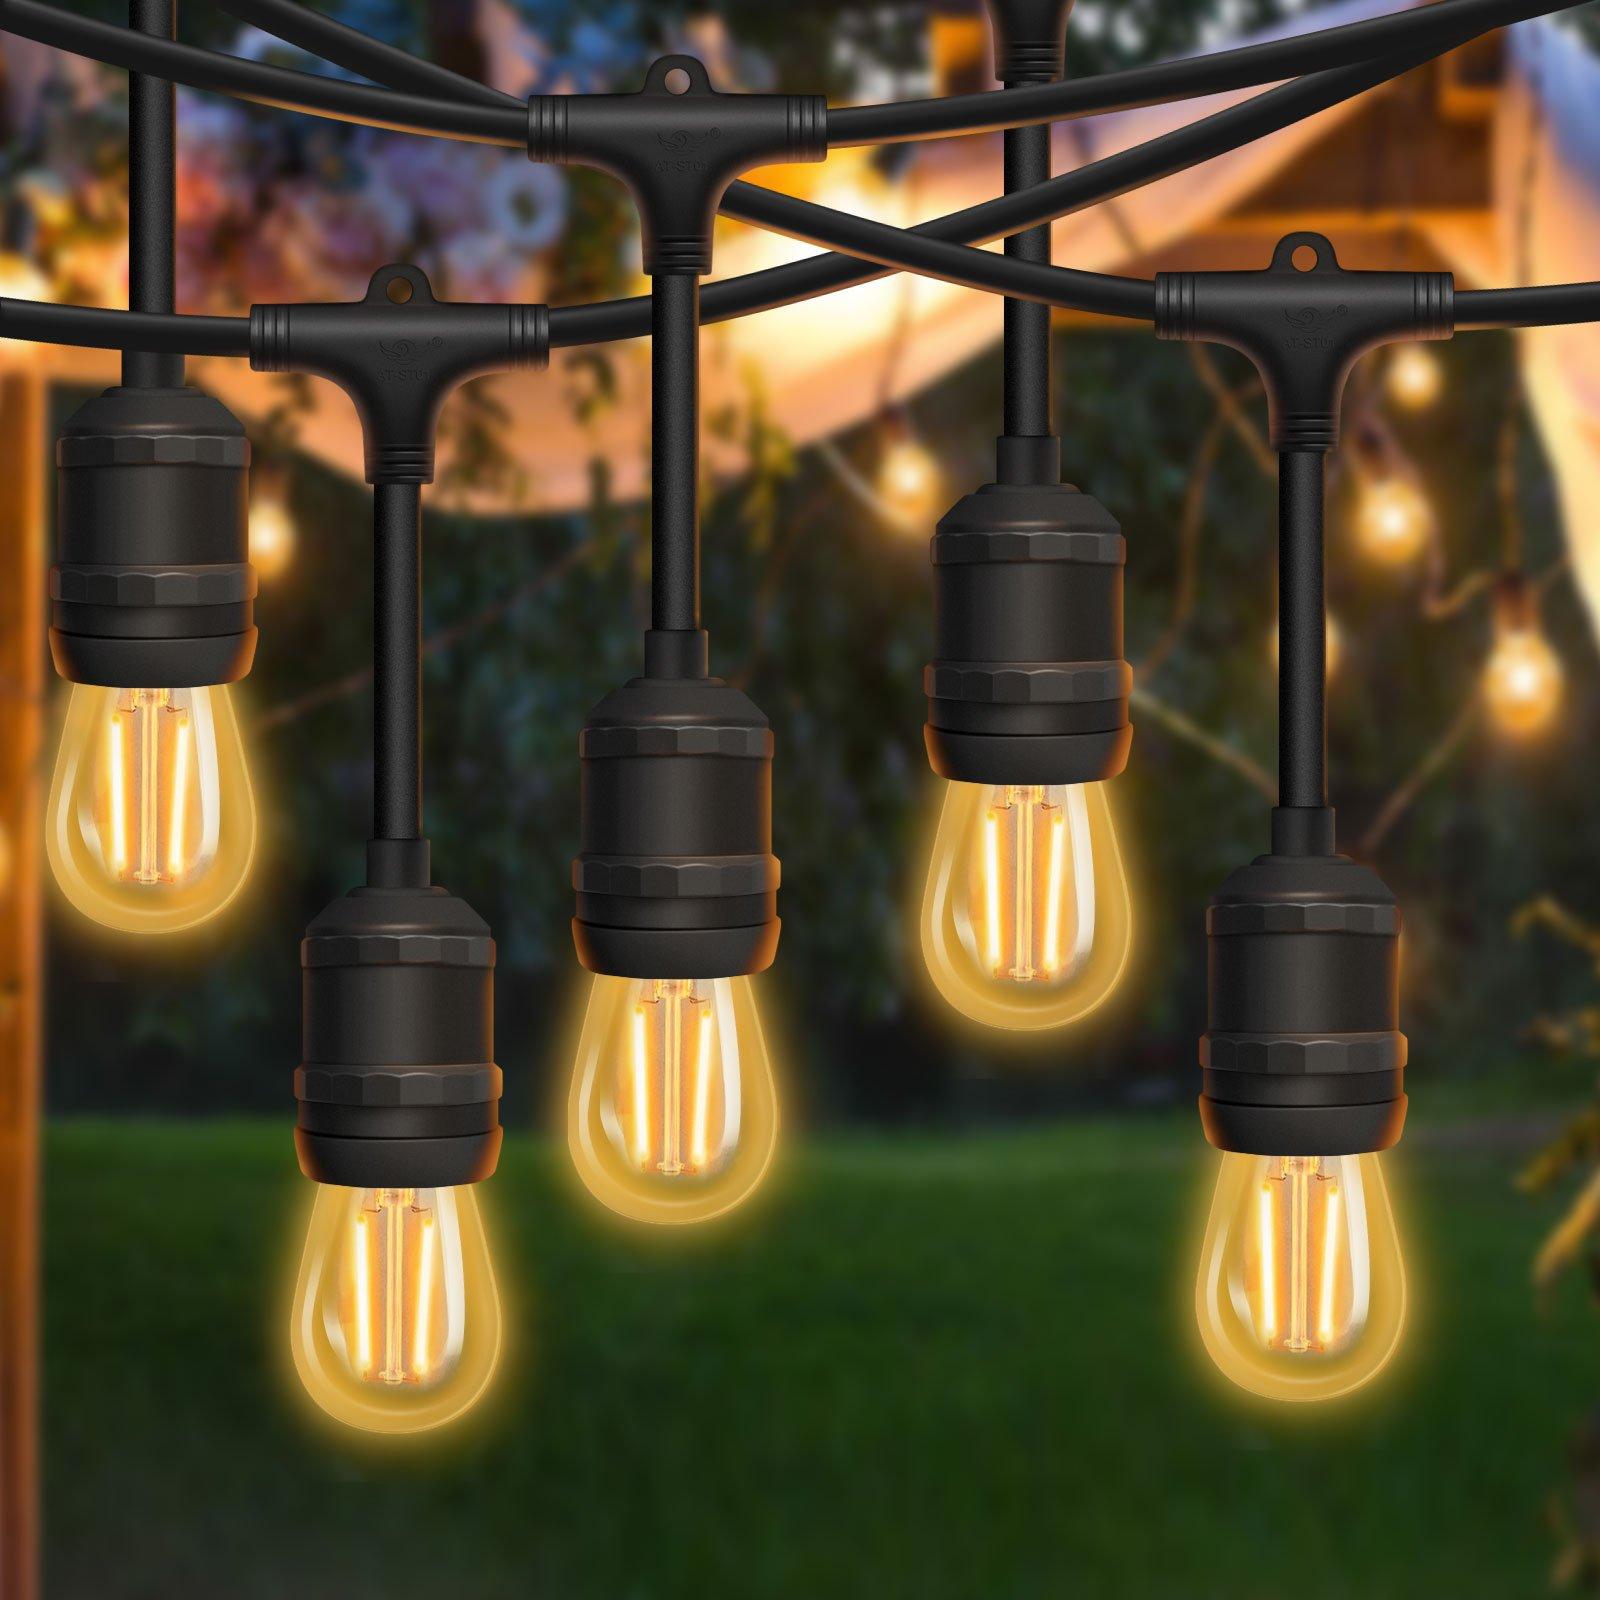 10M Drop Outdoor Garden String Lights with 15 Sockets E27 Holder, IP65 Commercial-Grade (Bulb not in